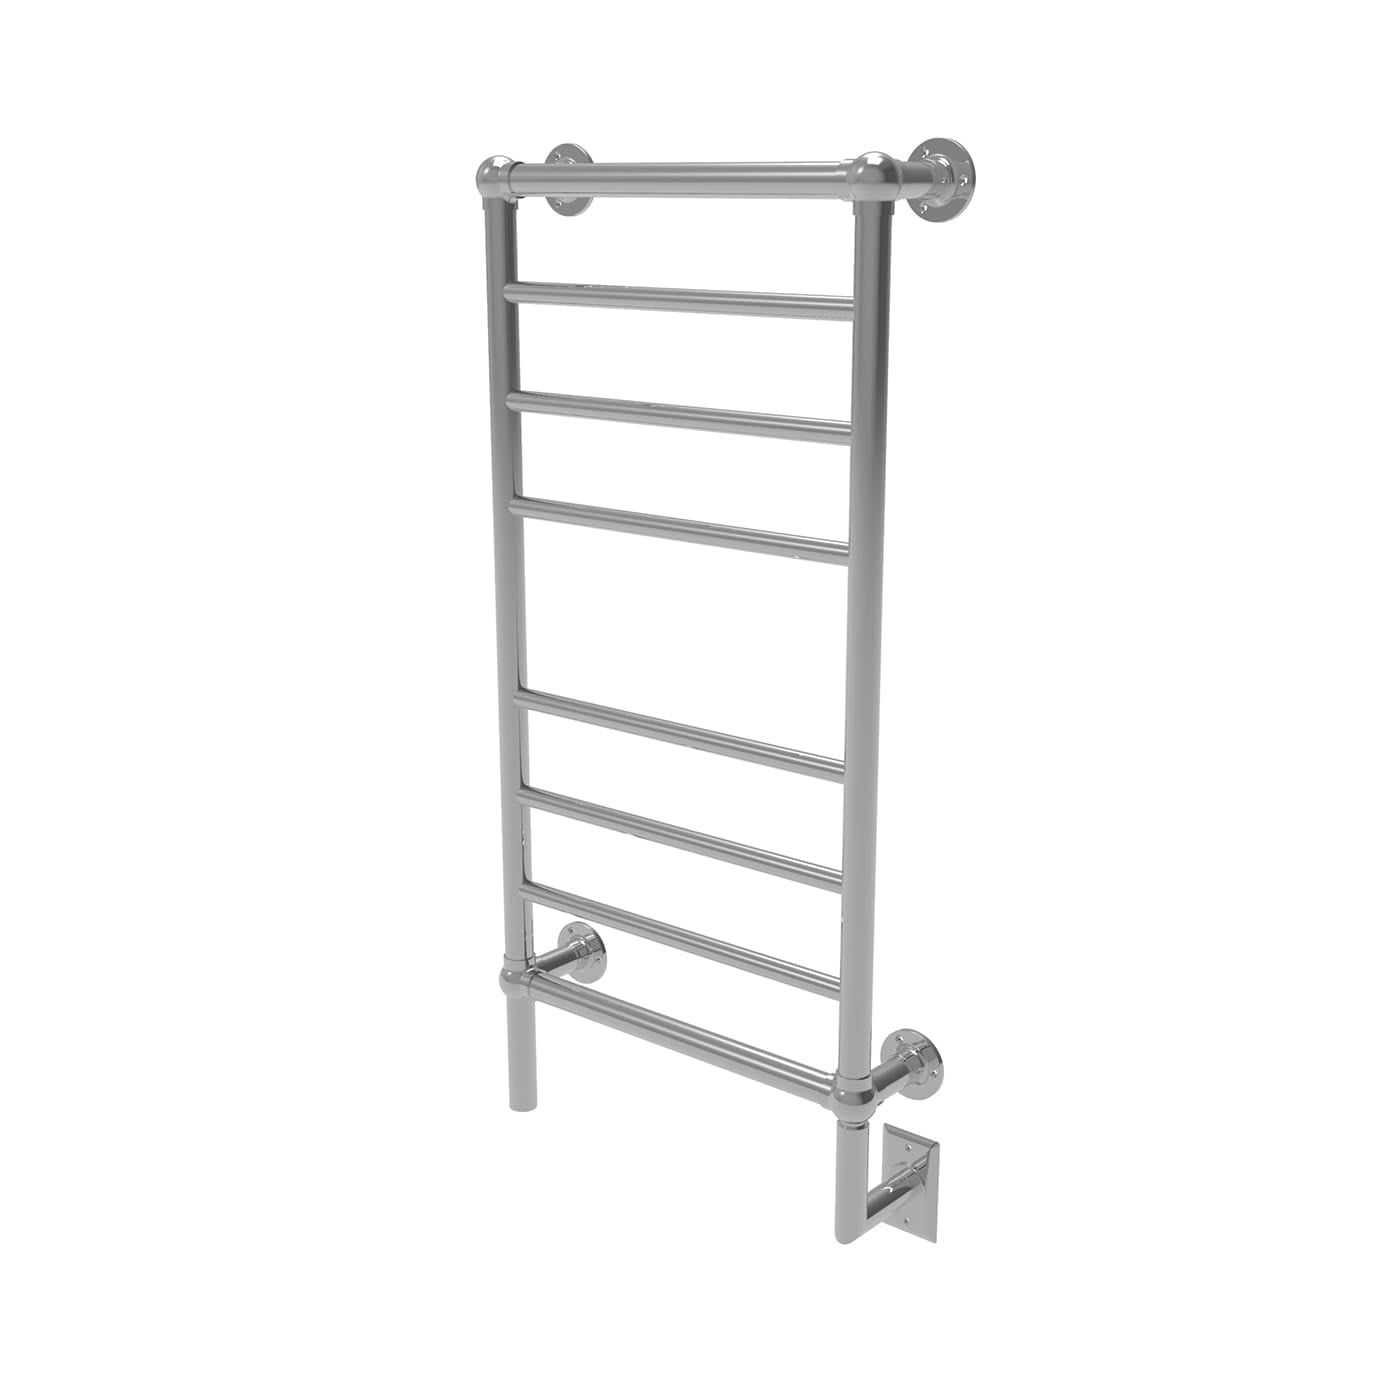 Picture of Amba T-2040PN 43.13 x 21 x 5.37 in. Towel Warmer - Polished Nickel